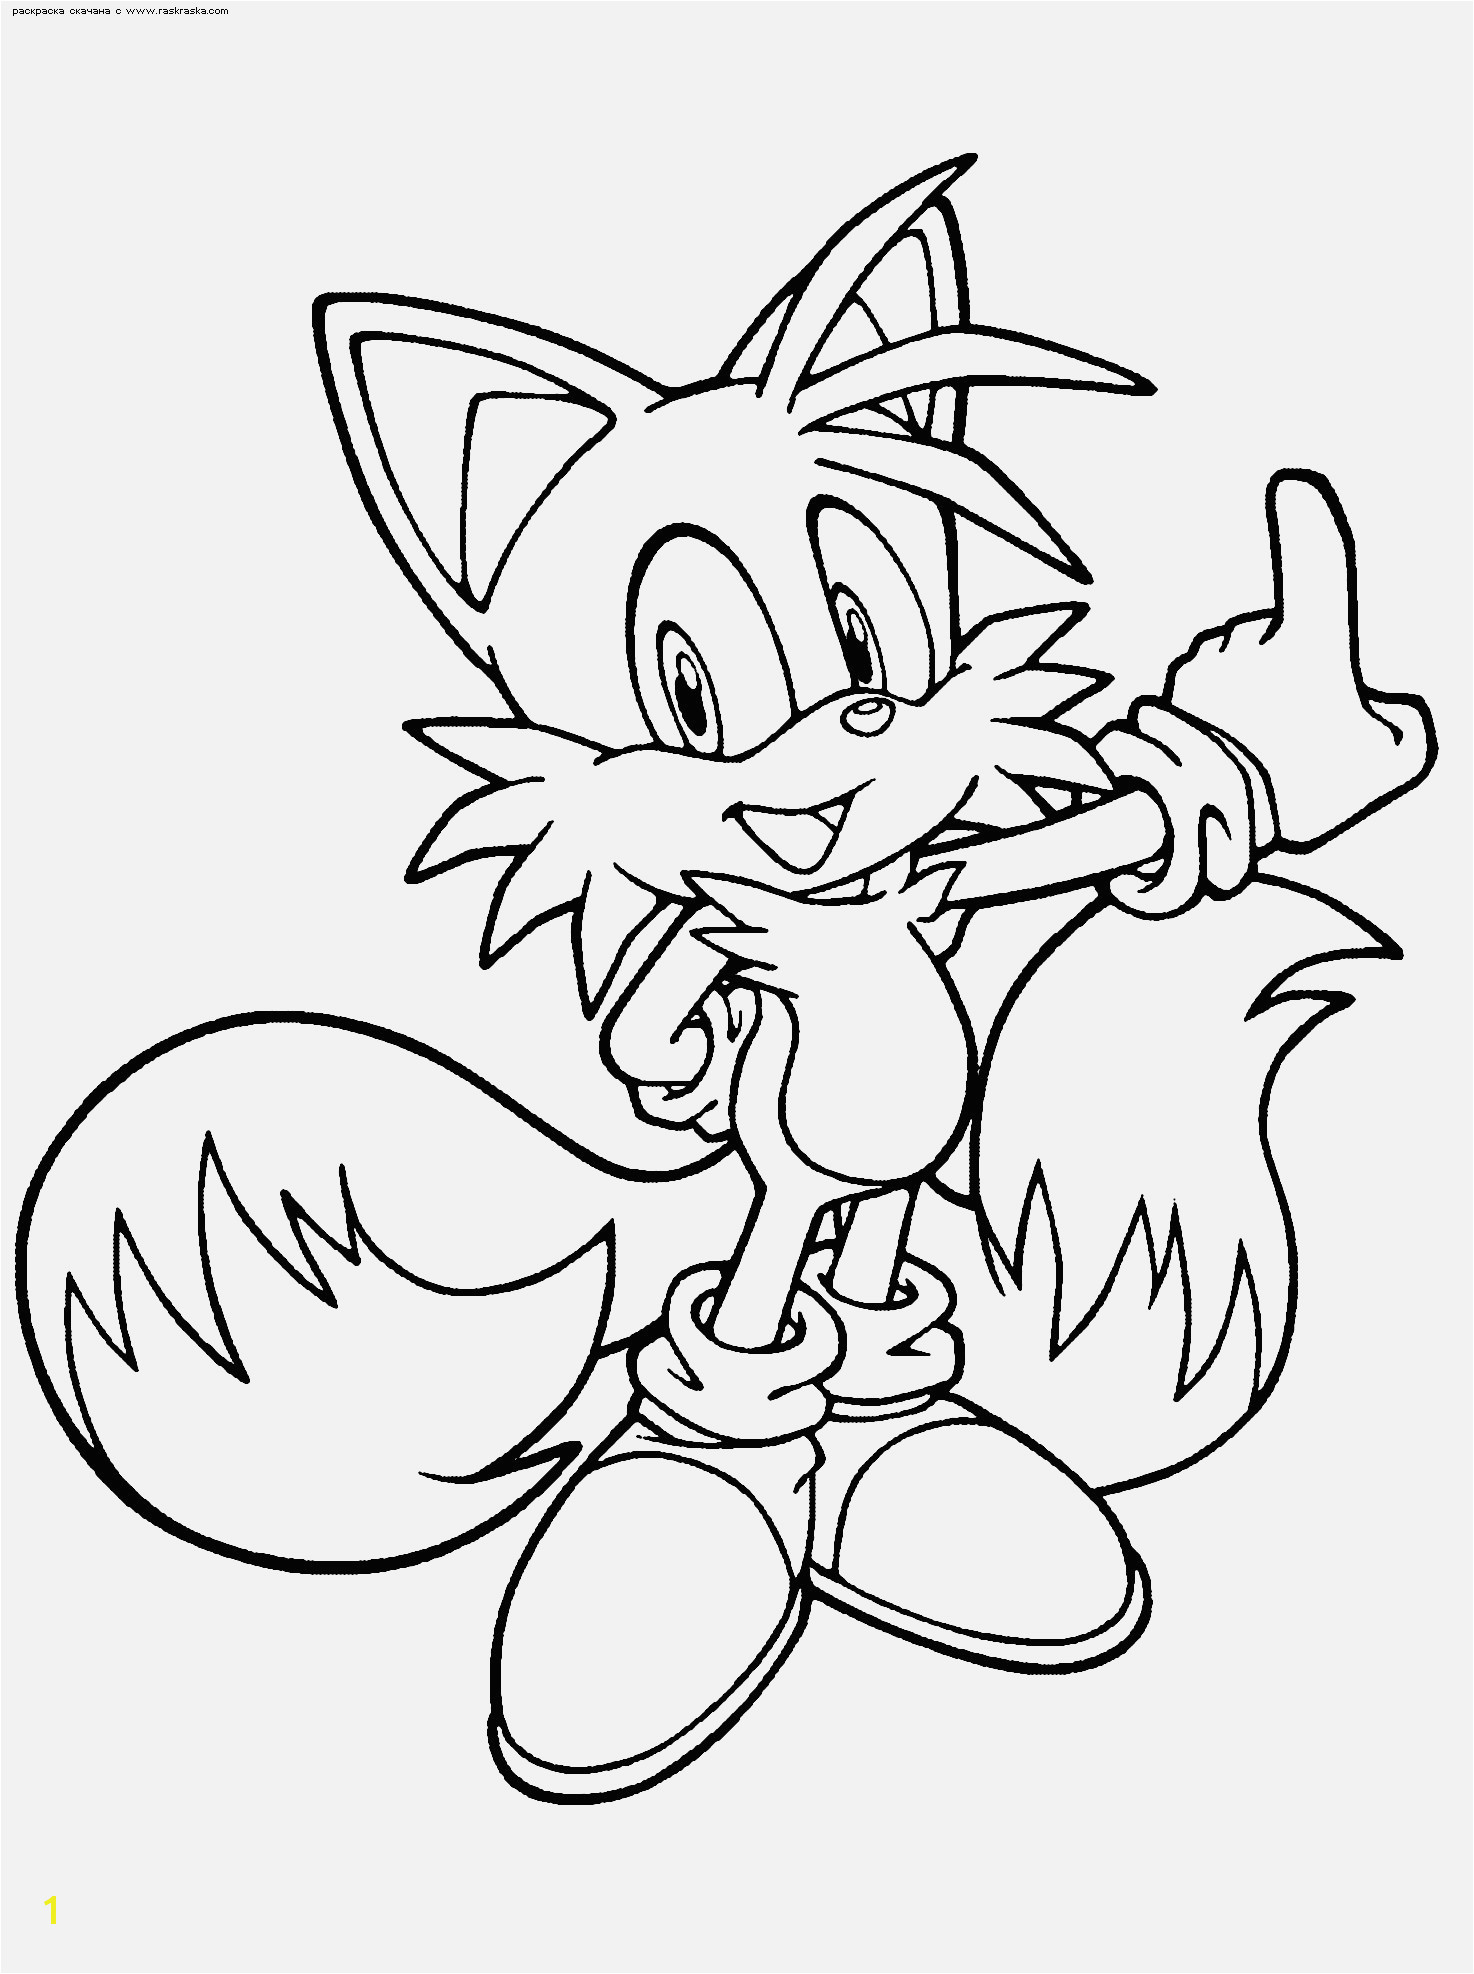 Sonic the Hedgehog Coloring Book Download and Print for Free Awesome sonic Coloring Pages to Print